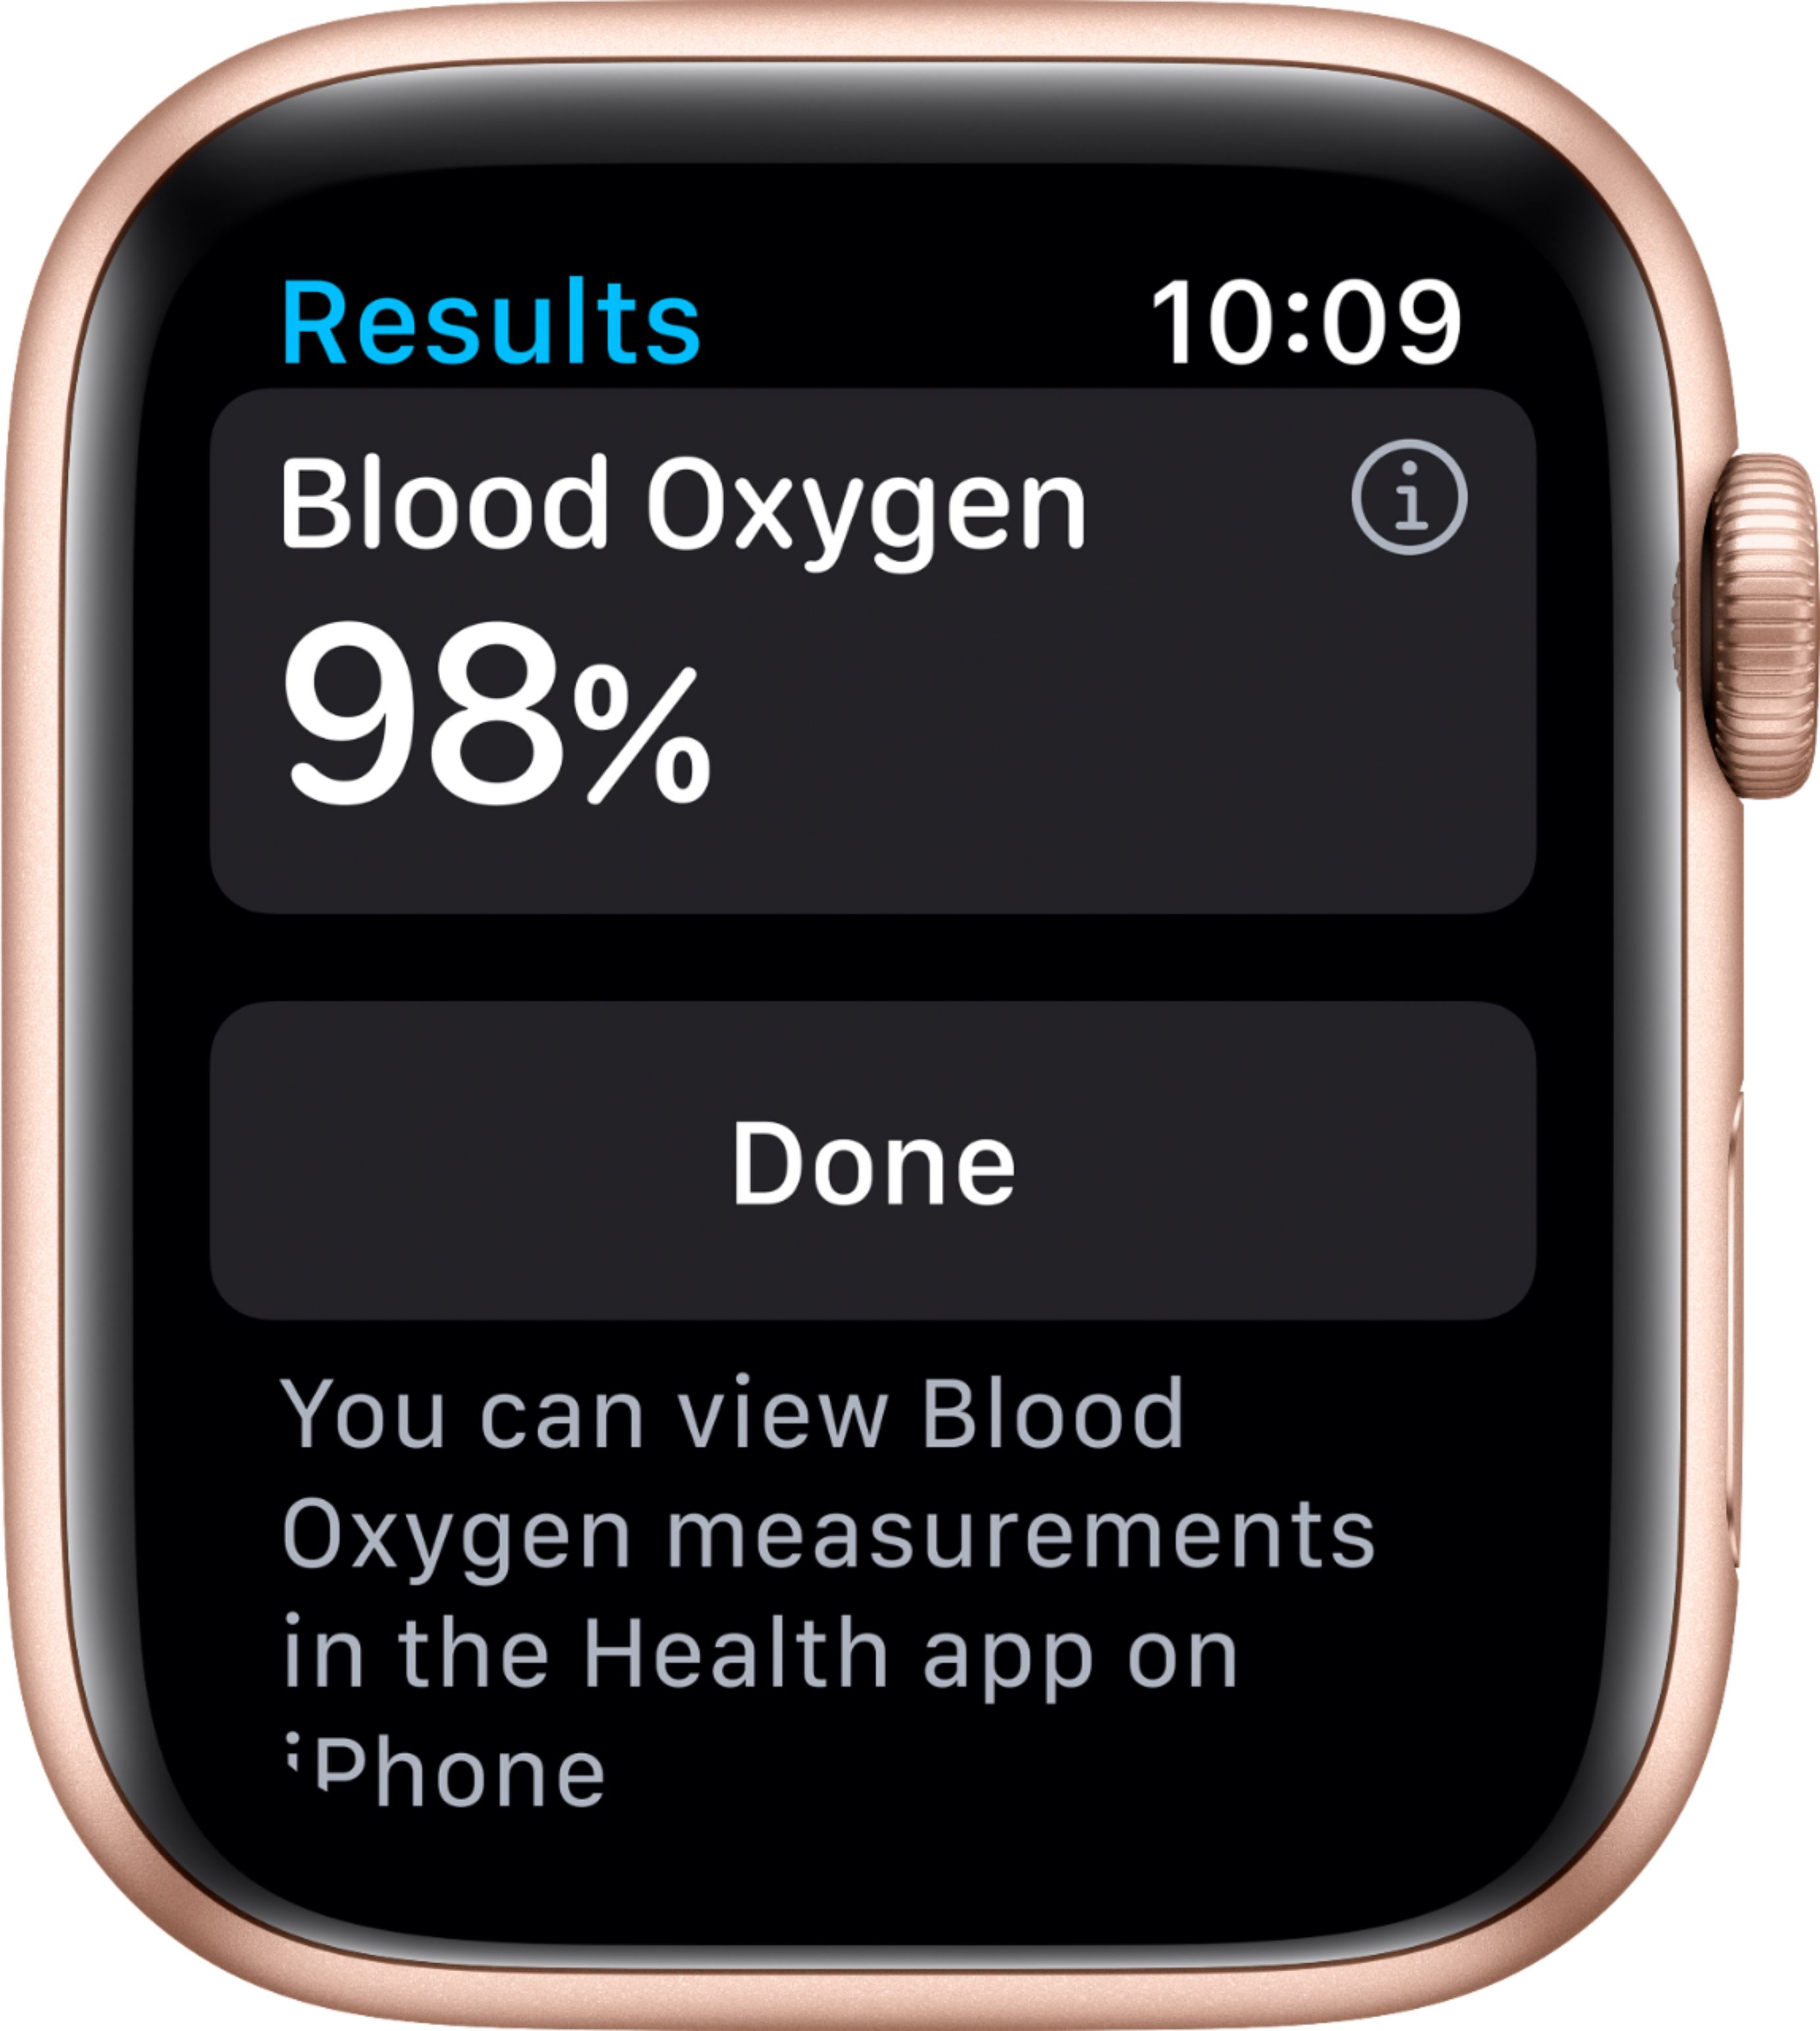 Apple Watch Series 6 delivers breakthrough wellness and fitness